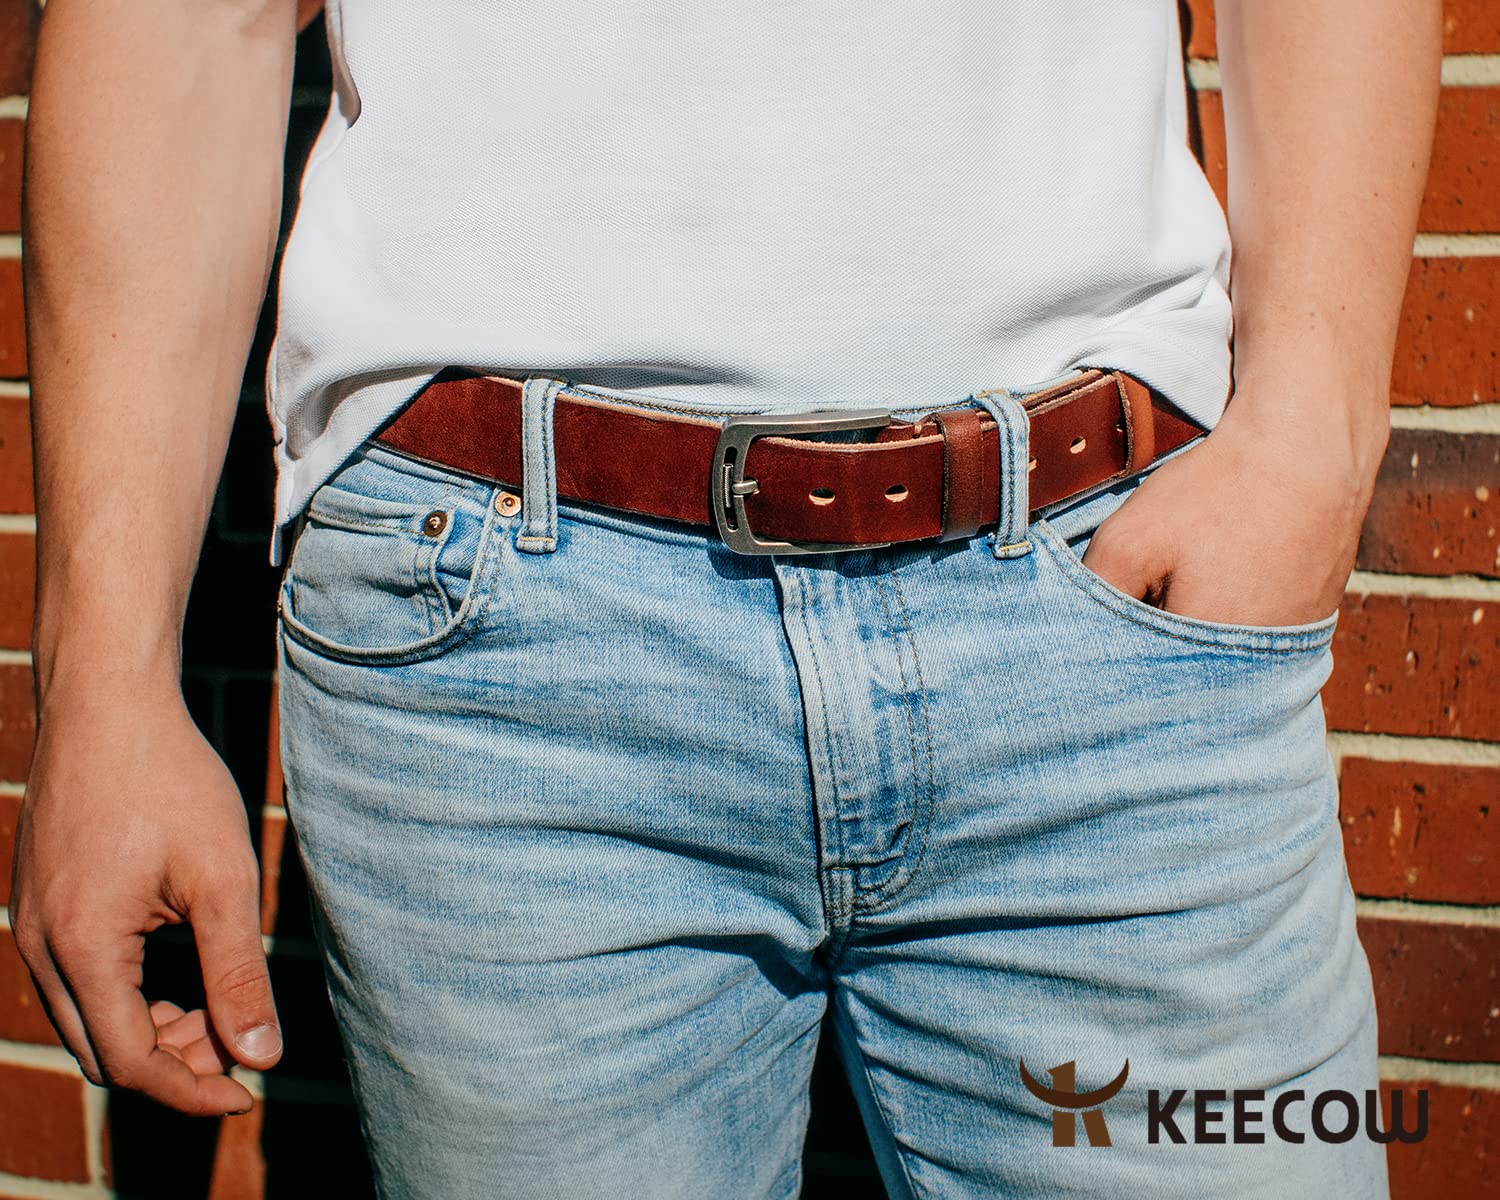 KEECOW Men's 100% Italian Cow Leather Belt Men With Anti-Scratch Buckle,Packed in a Box